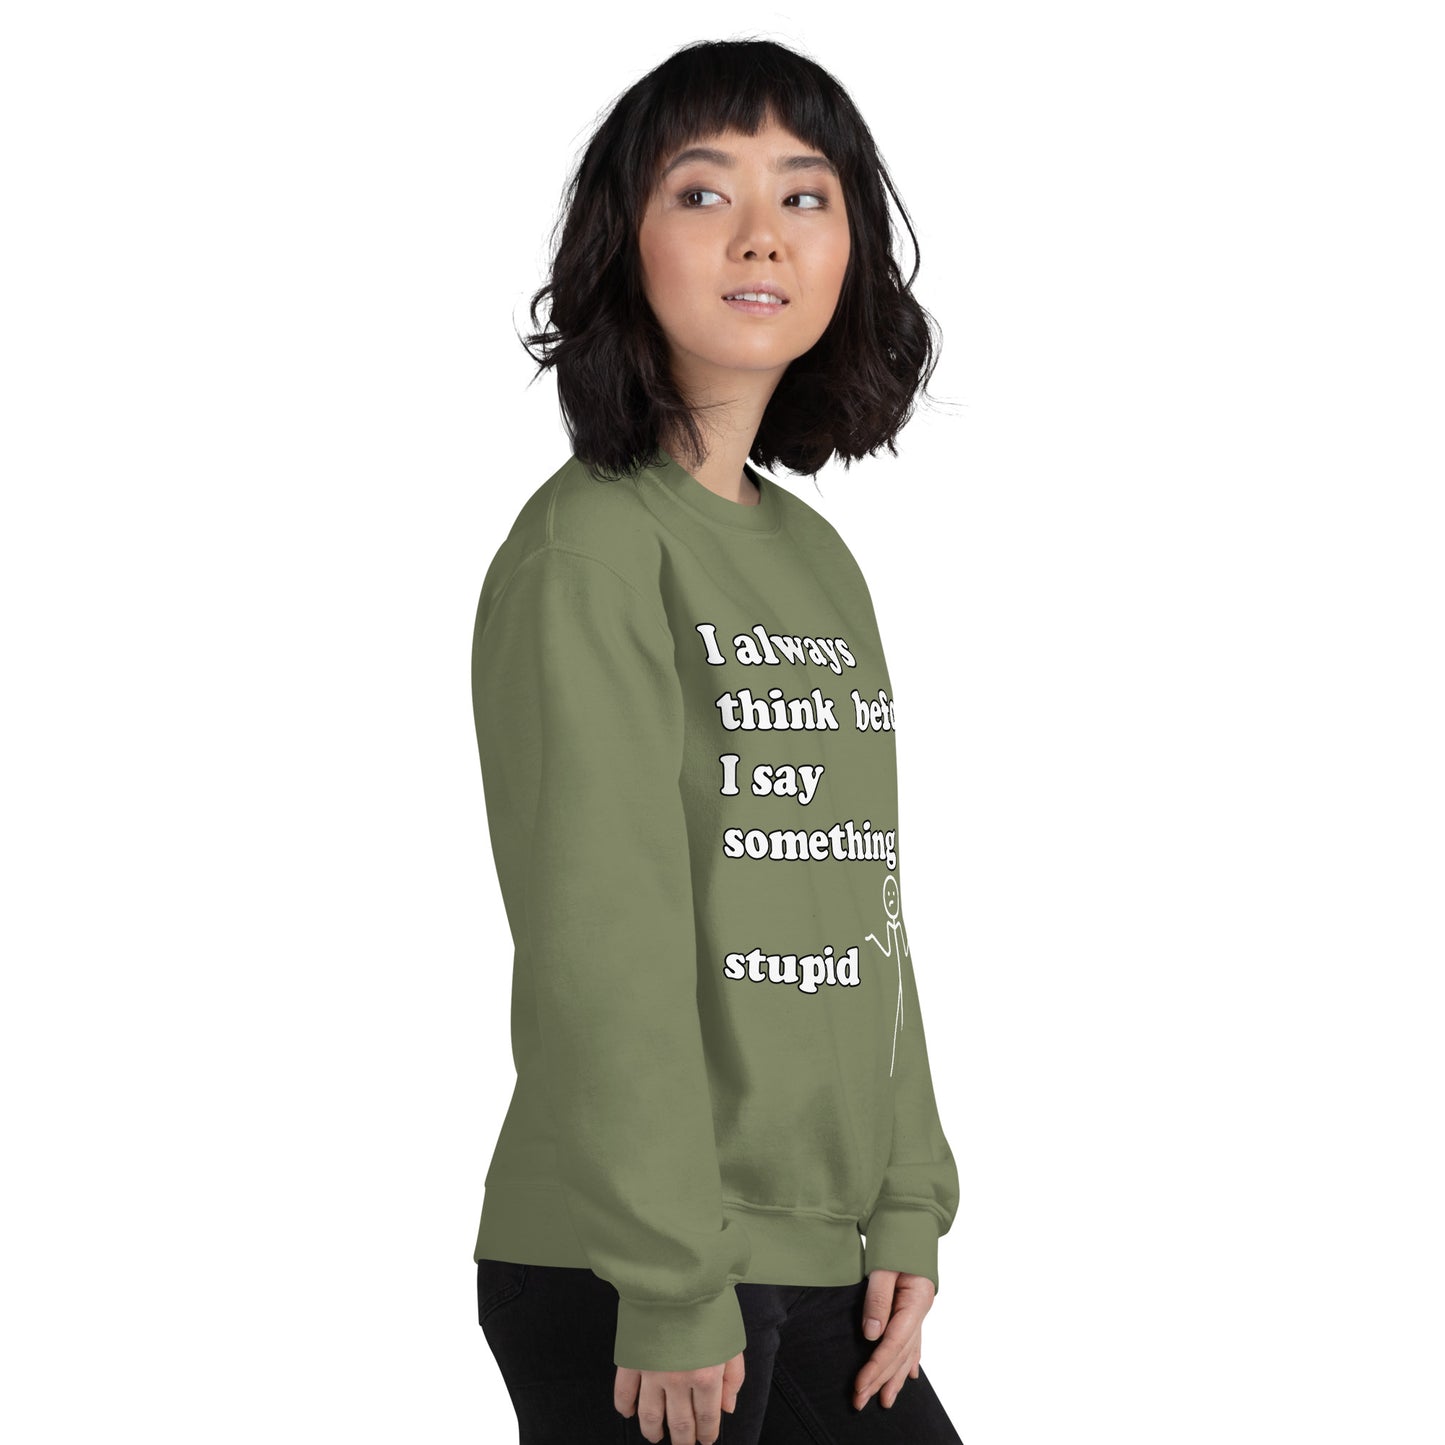 Woman with military green sweatshirt with text "I always think before I say something stupid"